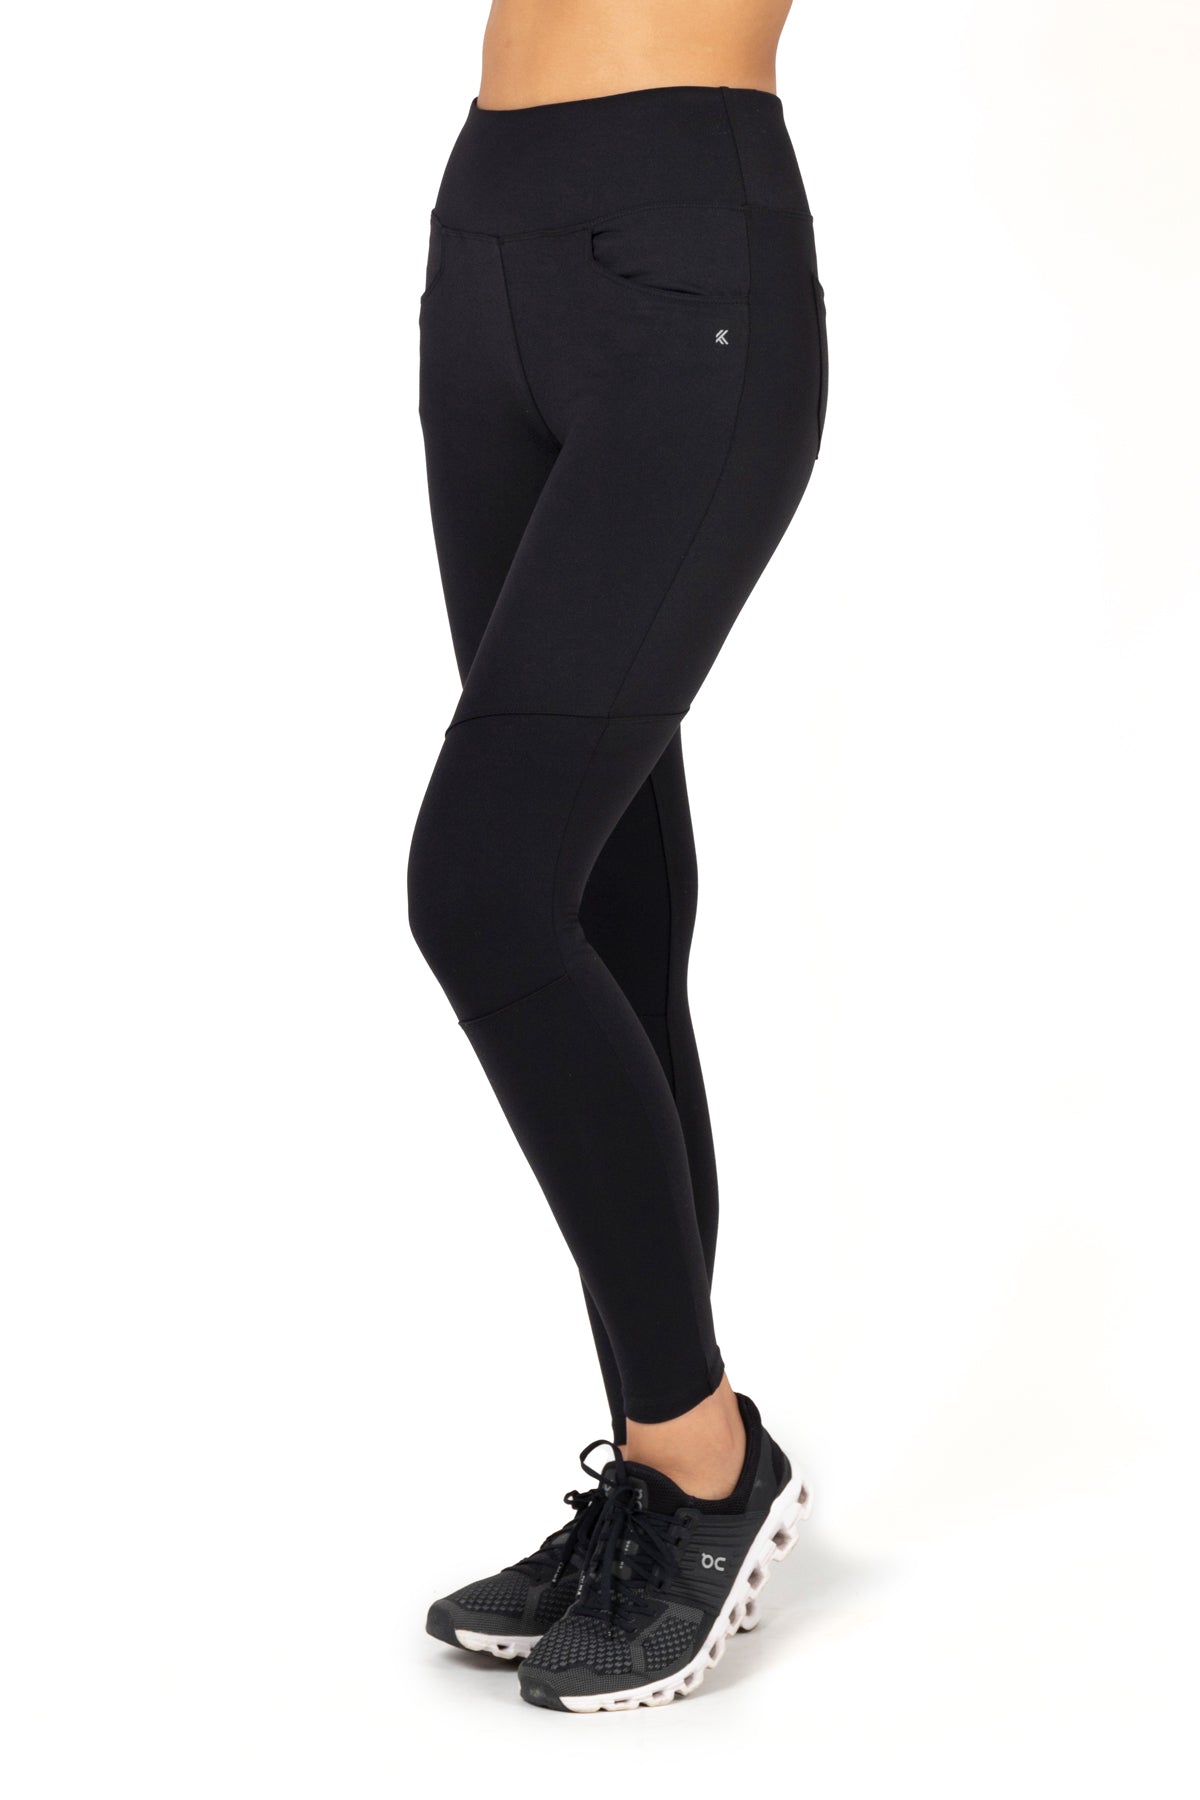 Buy Occffy High Waist Out Pocket Yoga Pants for Women Tummy